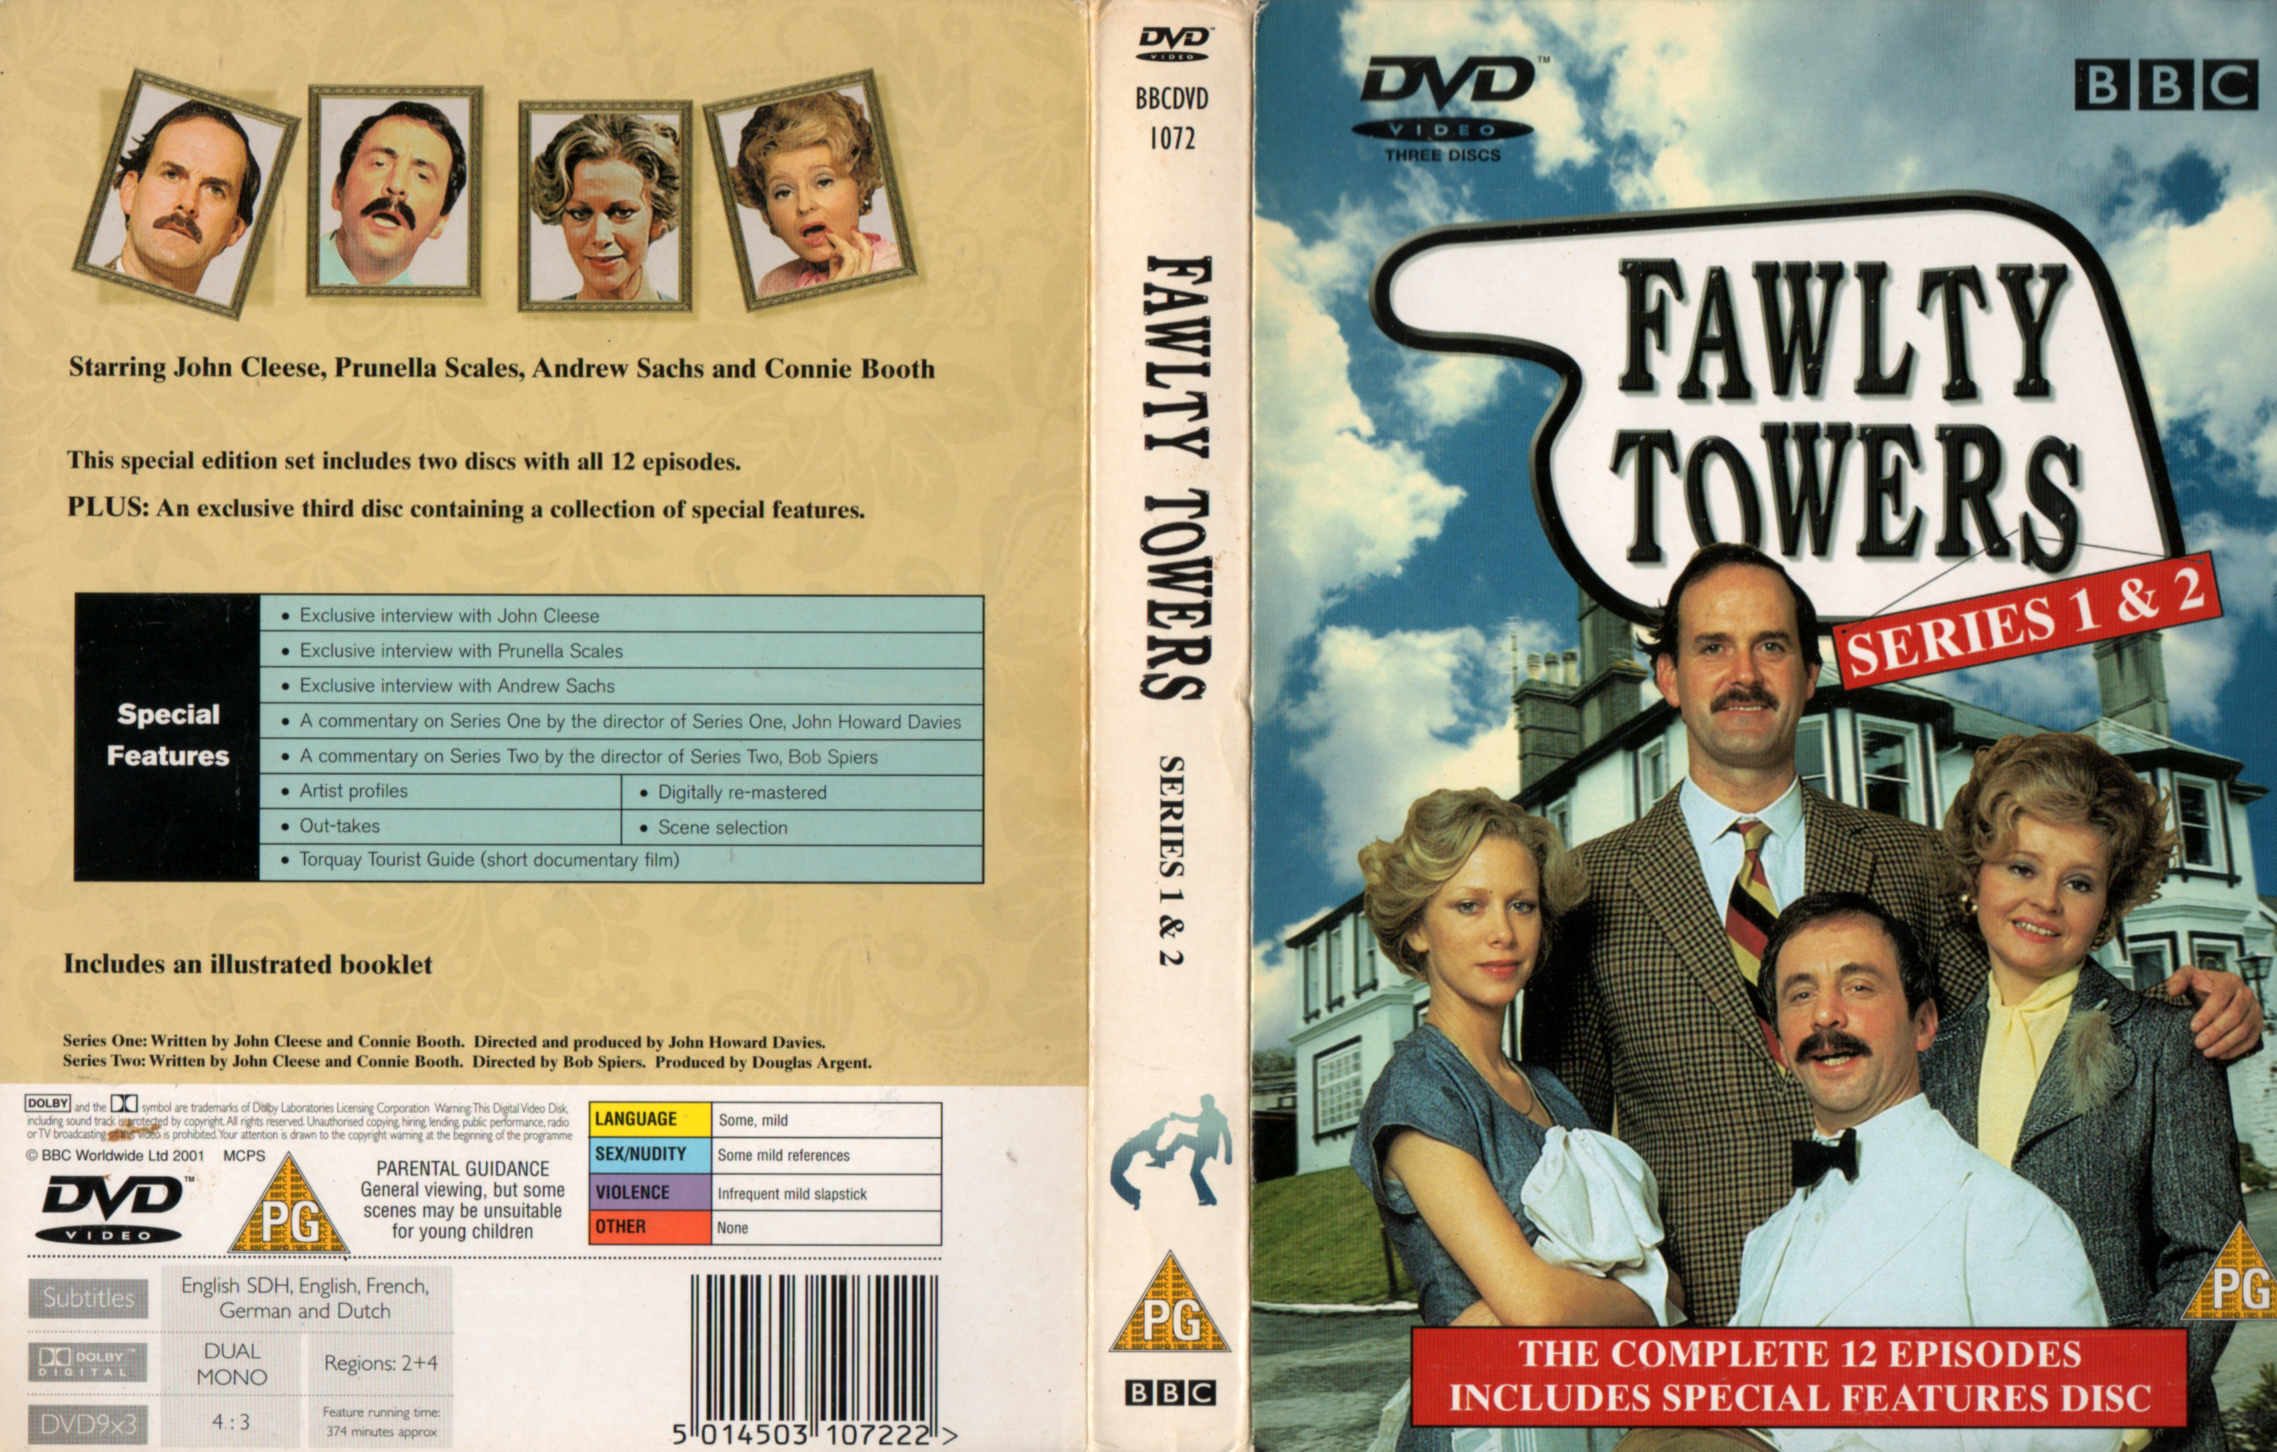 Jaquette DVD Fawlty towers Zone 1